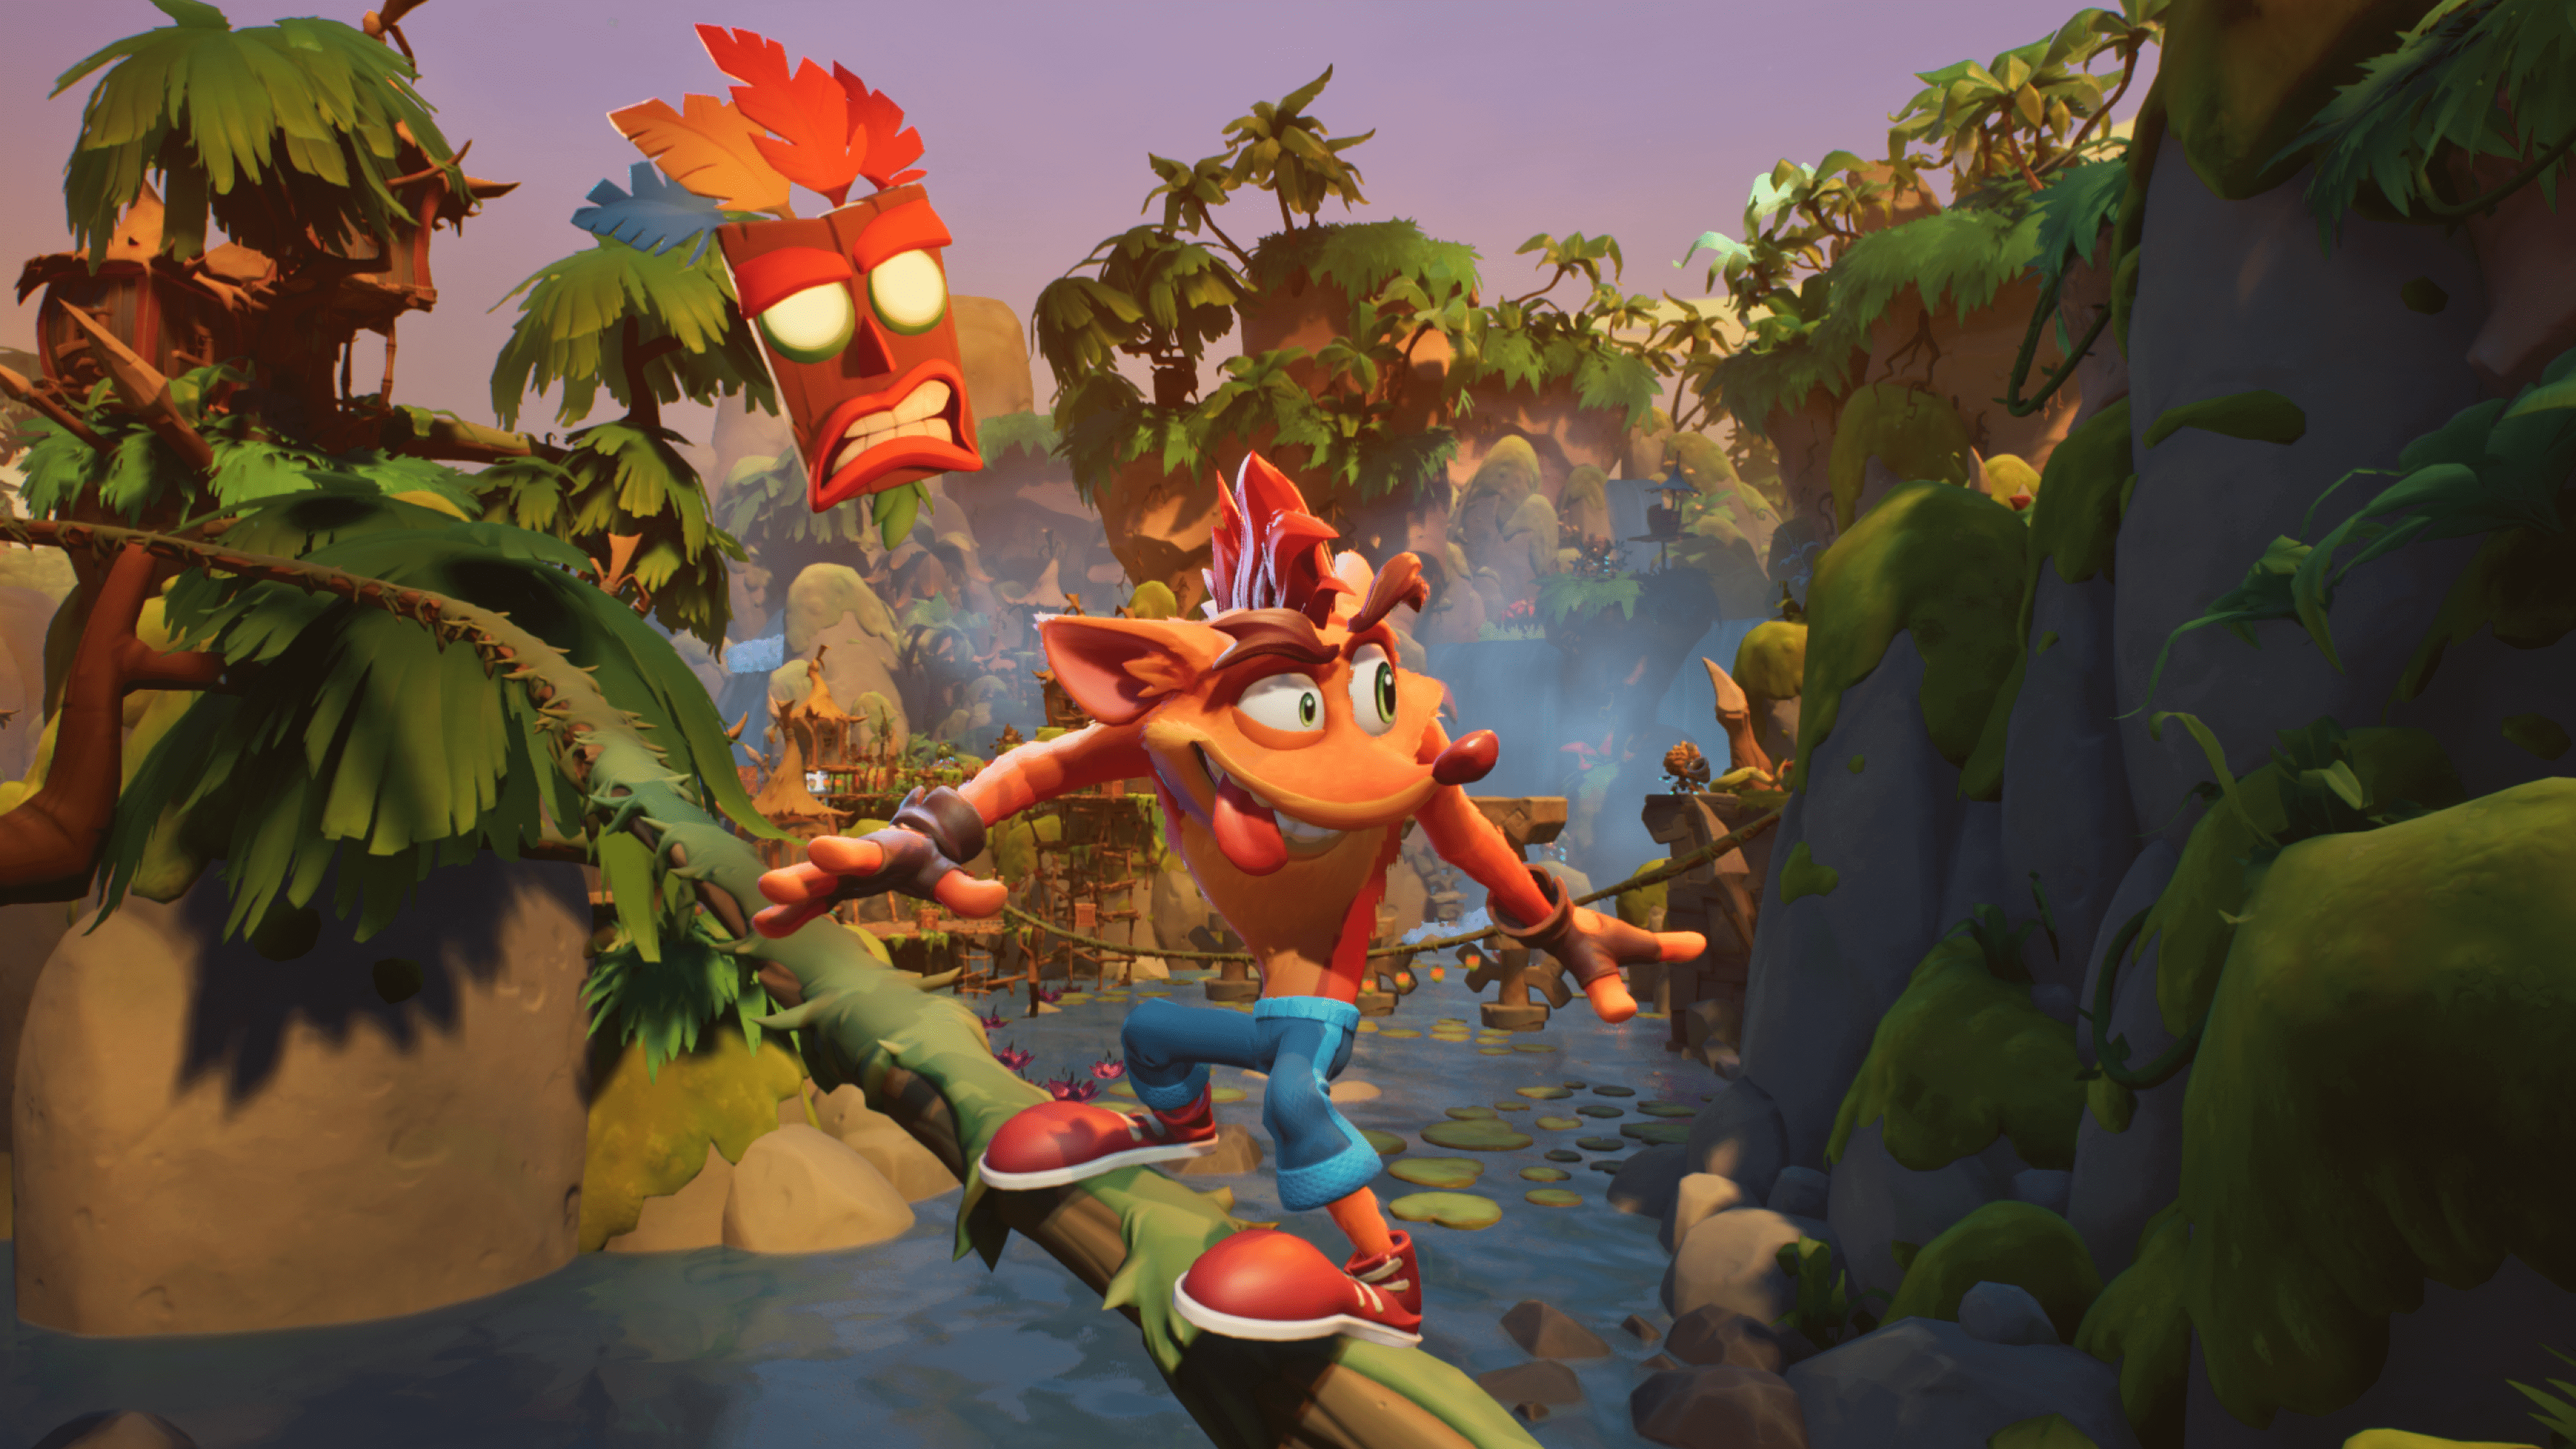 Steam free download: Gorgeous Mario, Crash Bandicoot inspired adventure  available now